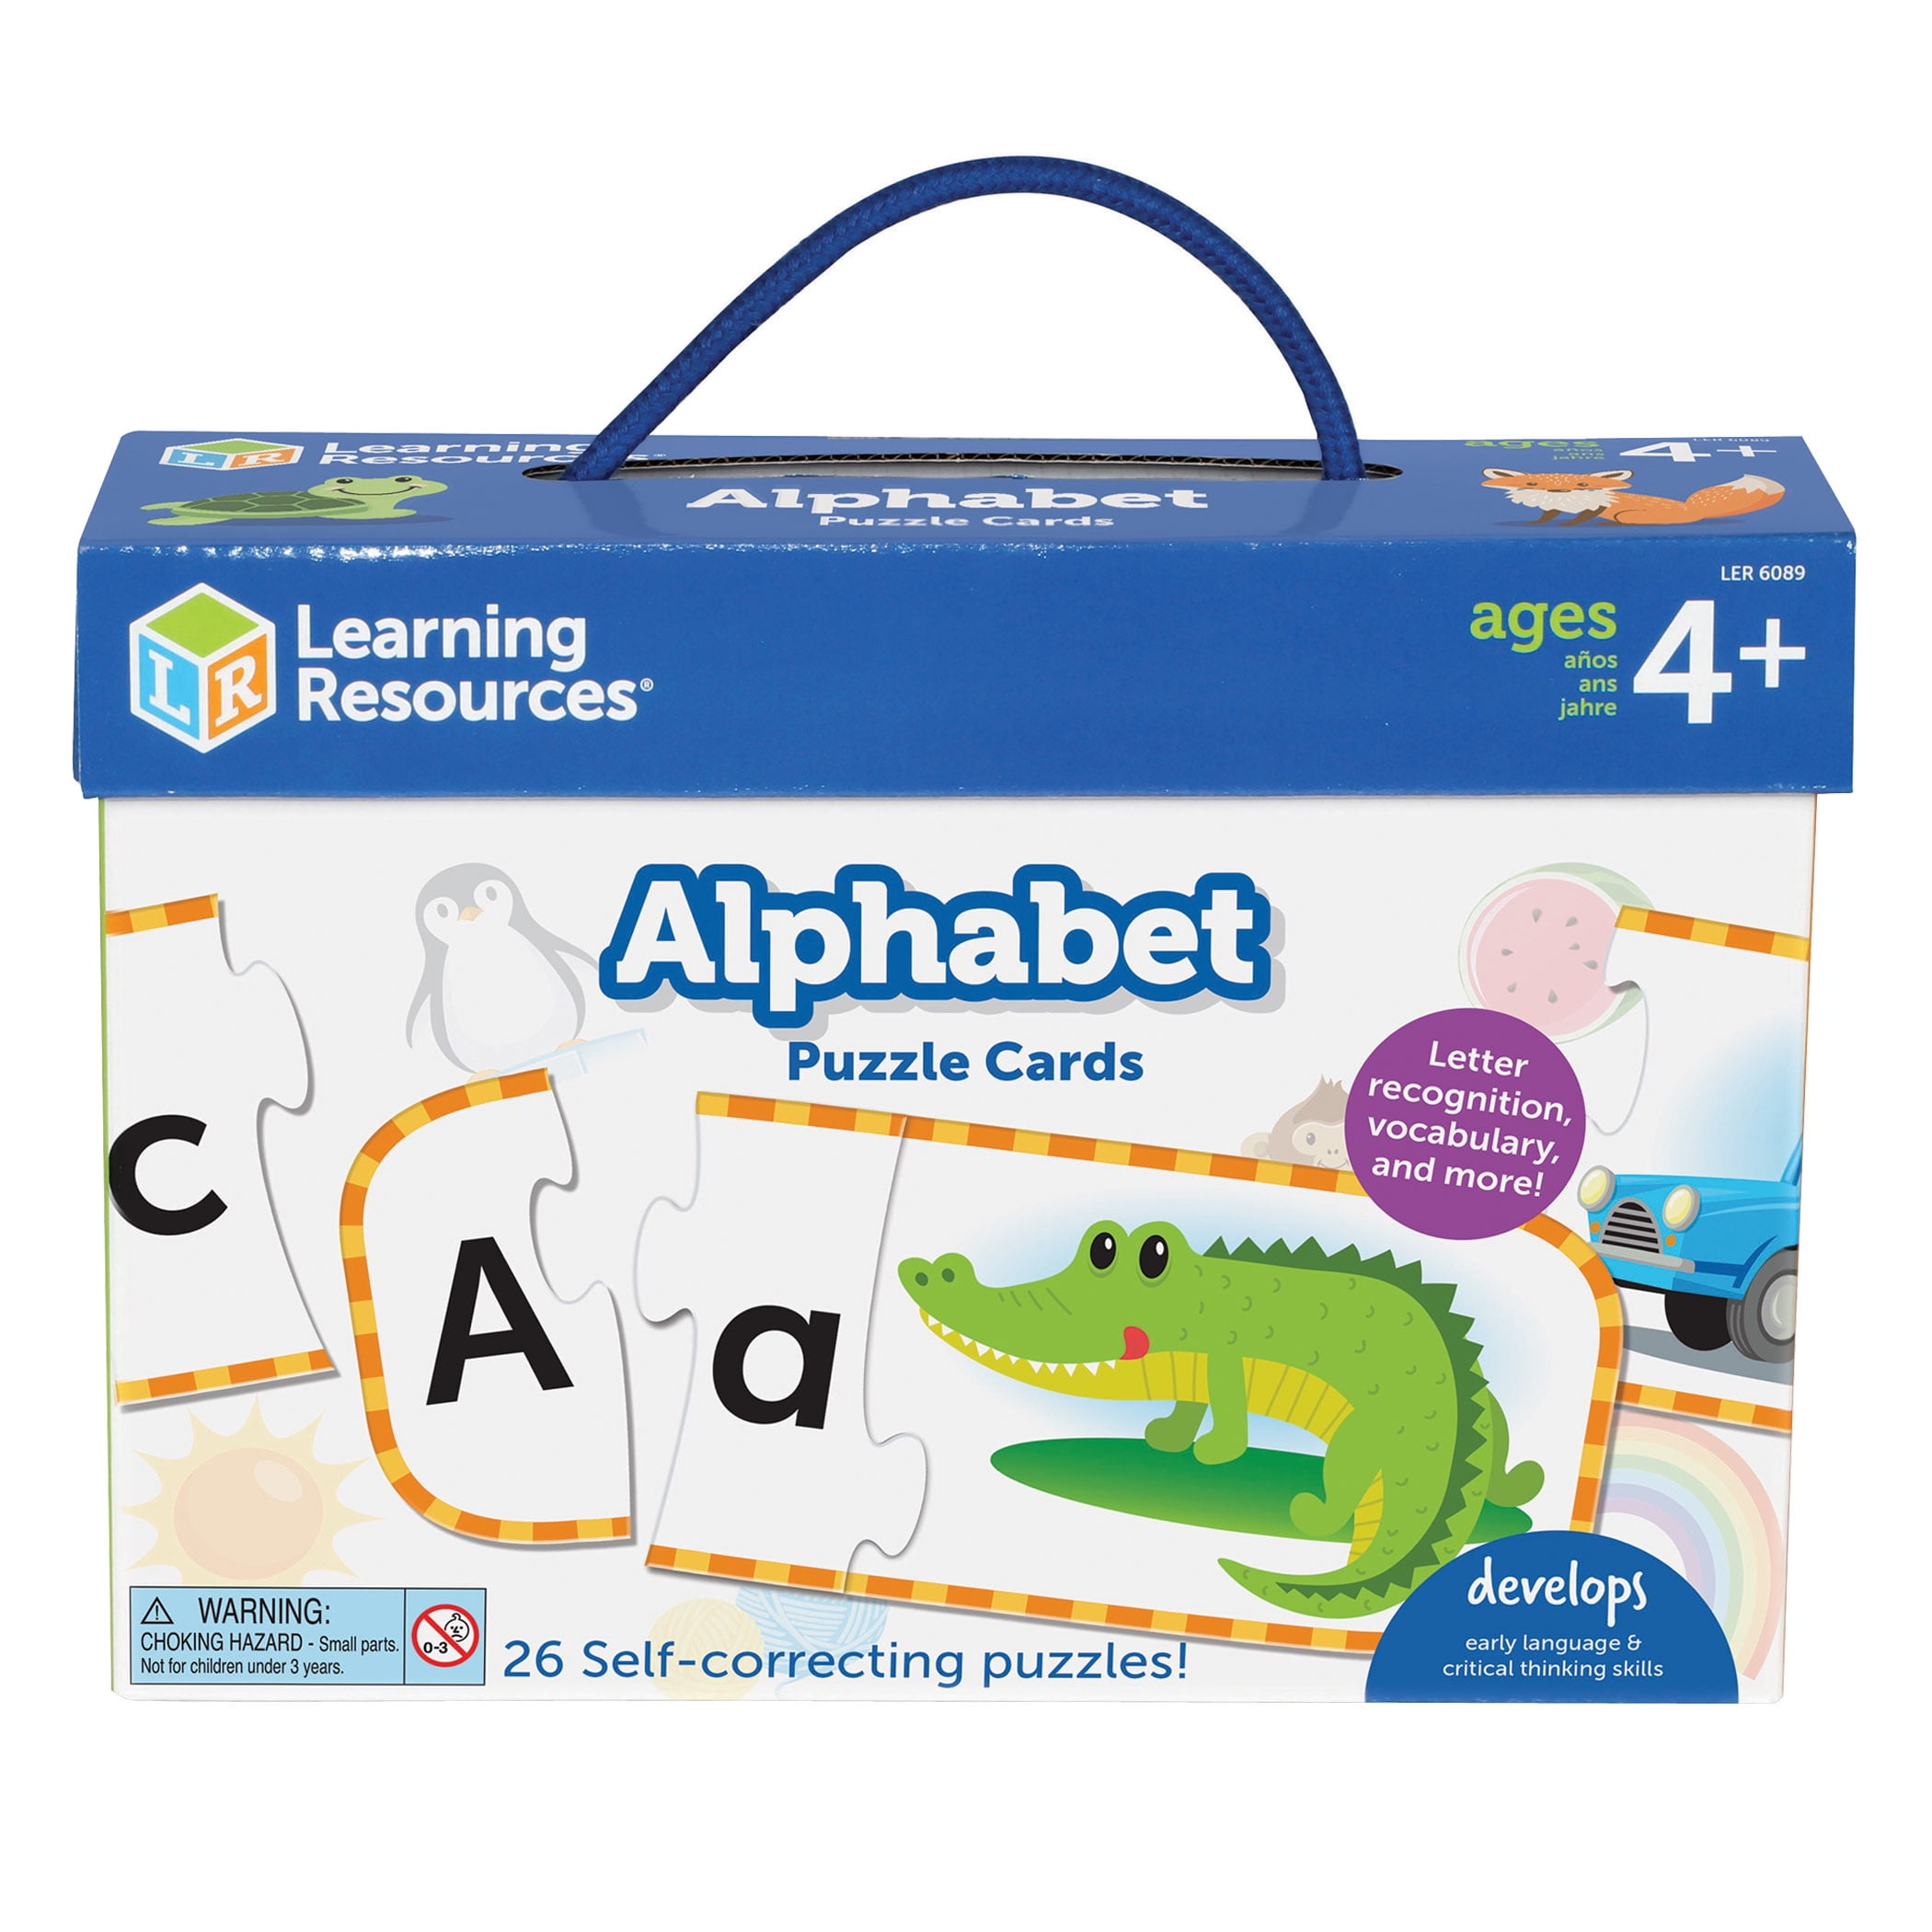 Alphabet Lore Coloring Book - 52 Uppercase and Lowercase Letters A to Z For  Kids